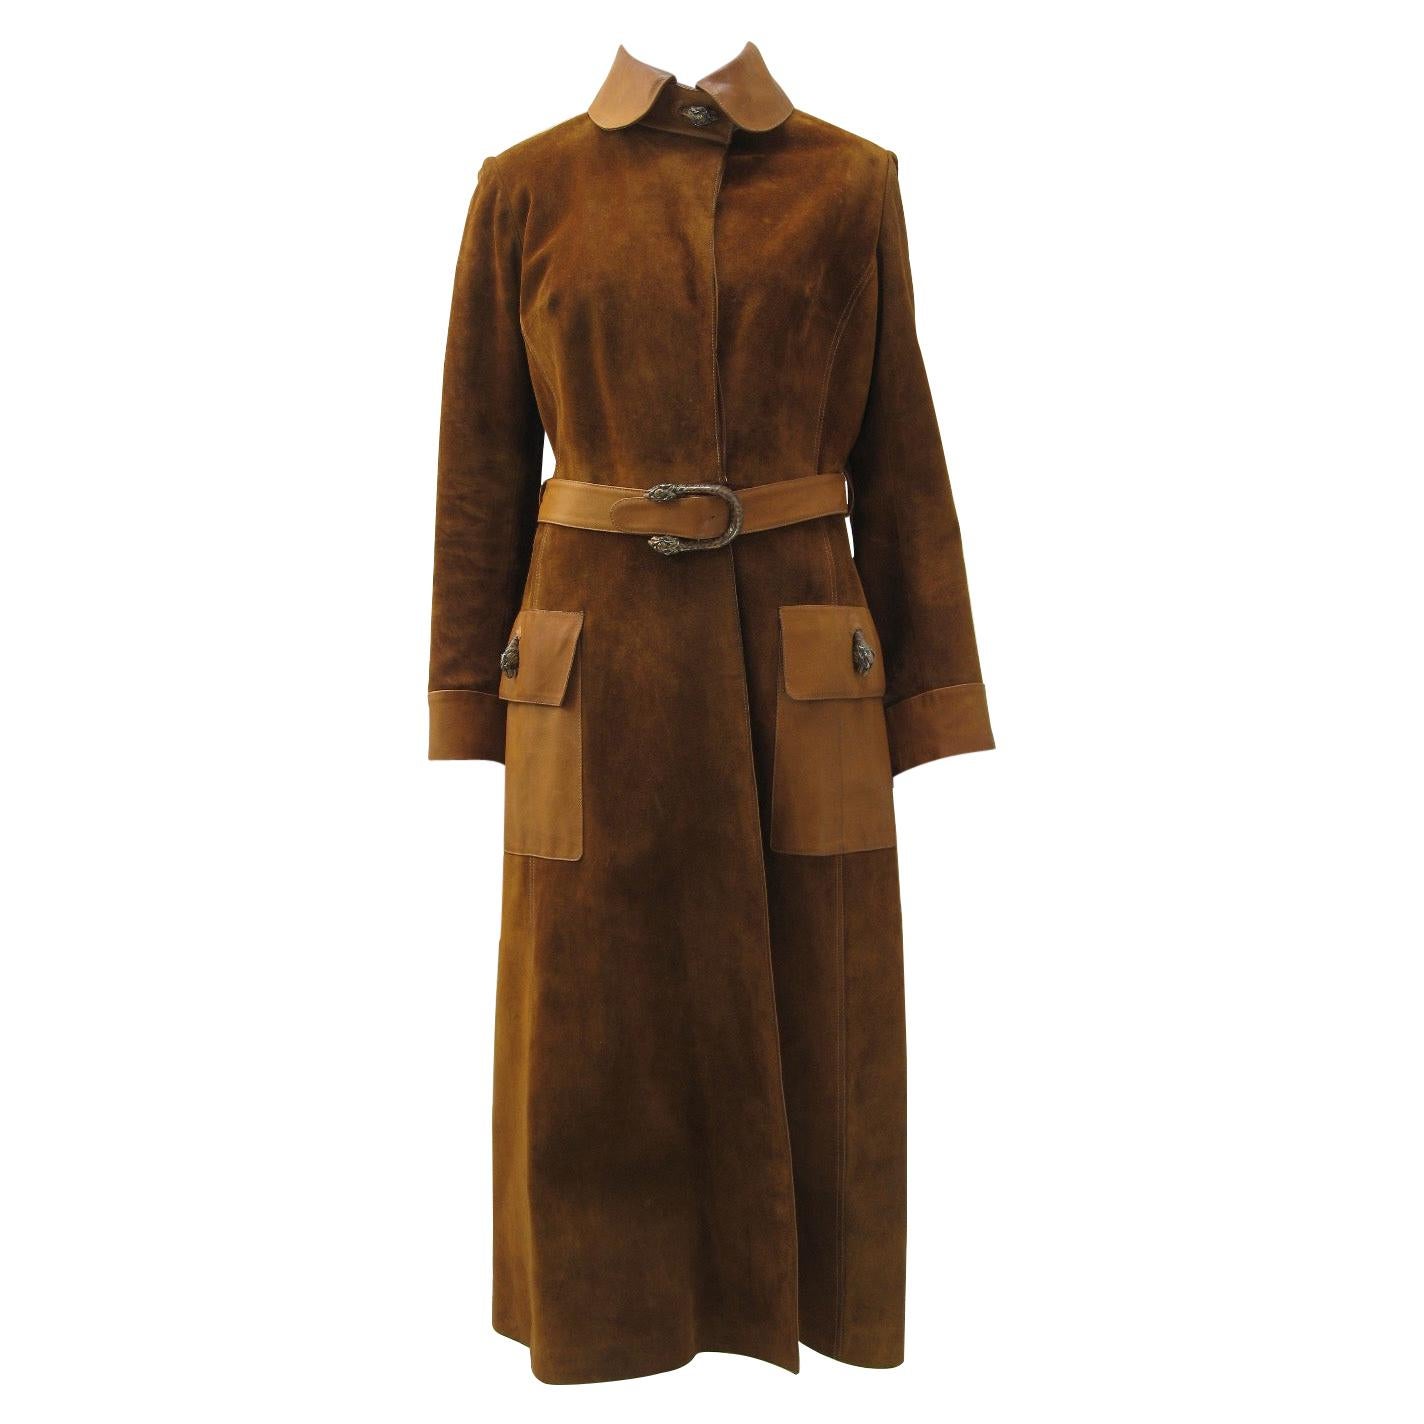 Vintage 1970s Gucci Tan Suede Leather Trim Coat with Tiger Hardware 